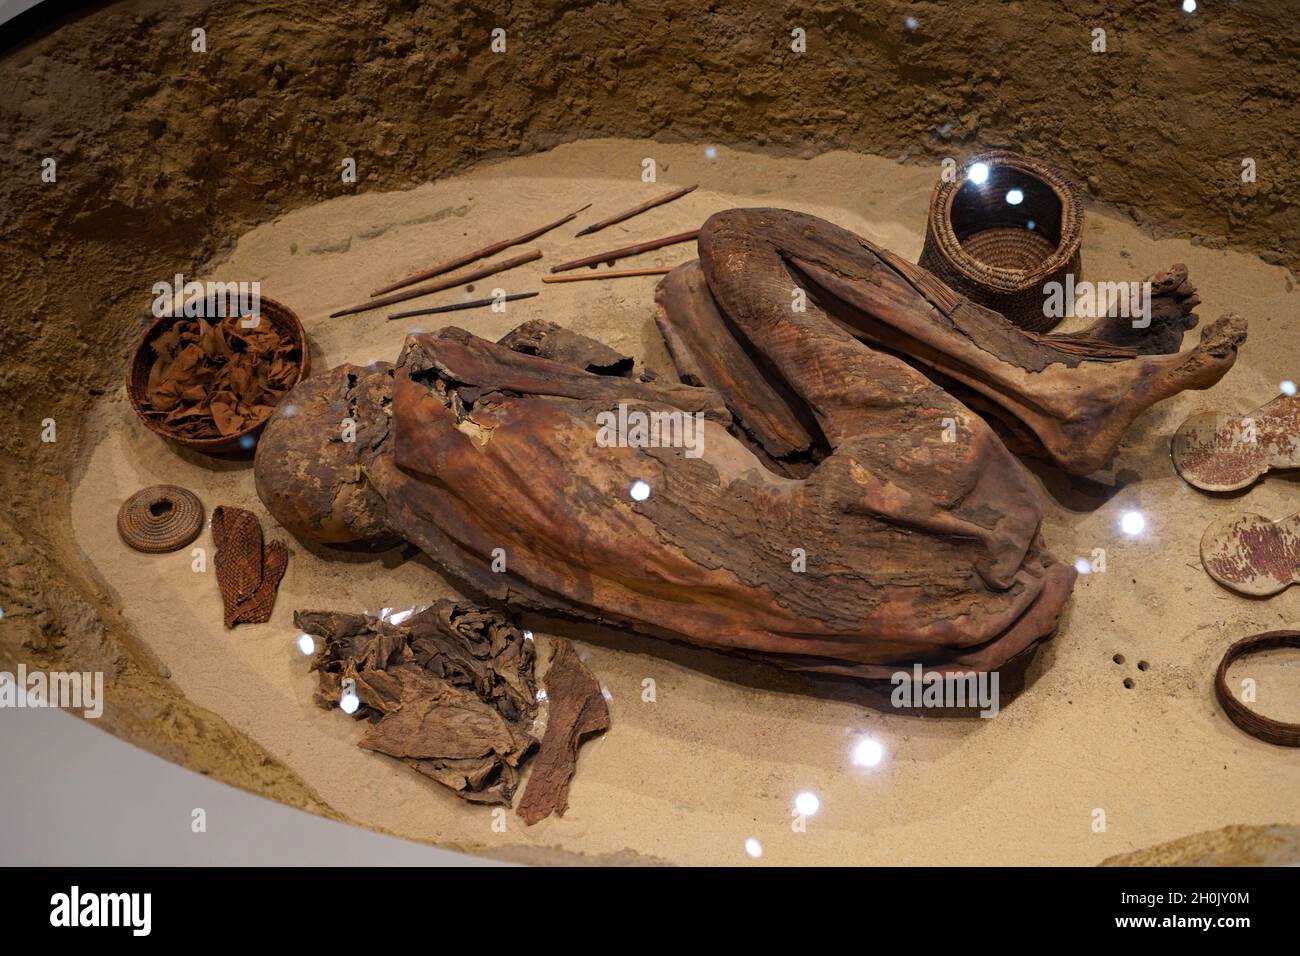 TURIN, ITALY - AUGUST 19, 2021: Mummy in fetal position. Mummification of one body during the Egyptian civilization, Egyptian Museum of Turin, Italy Stock Photo